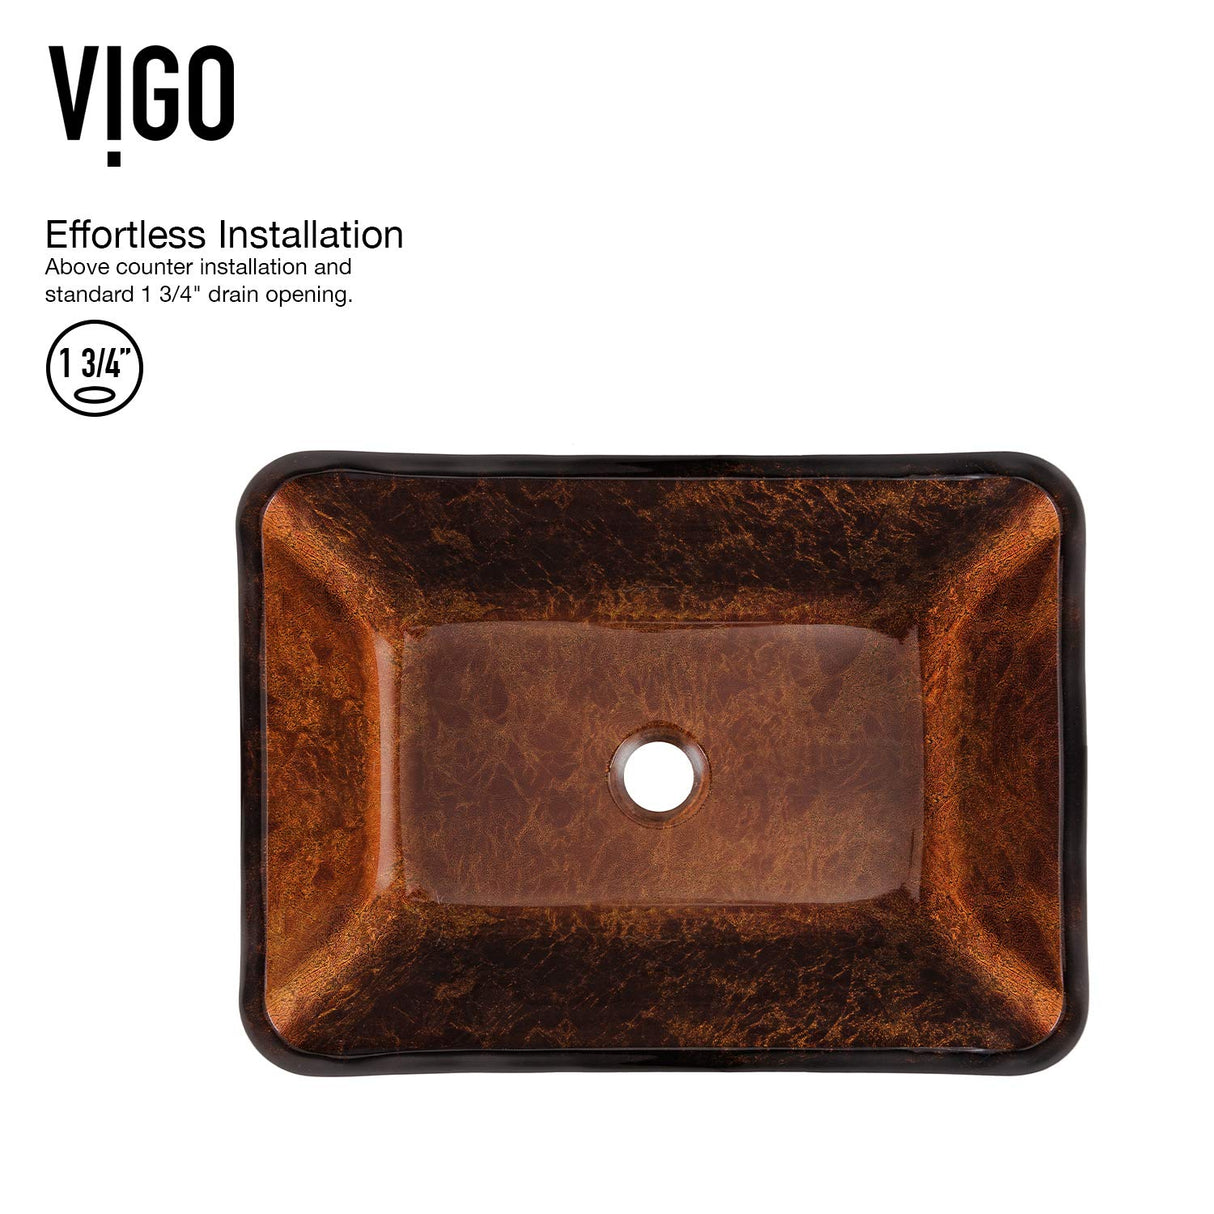 VIGO Russet 18.125 inch L x 13 inch W Over the Counter Freestanding Glass Rectangular Vessel Bathroom Sink in Red and Brown Fusion - Sink for Bathroom VG07089